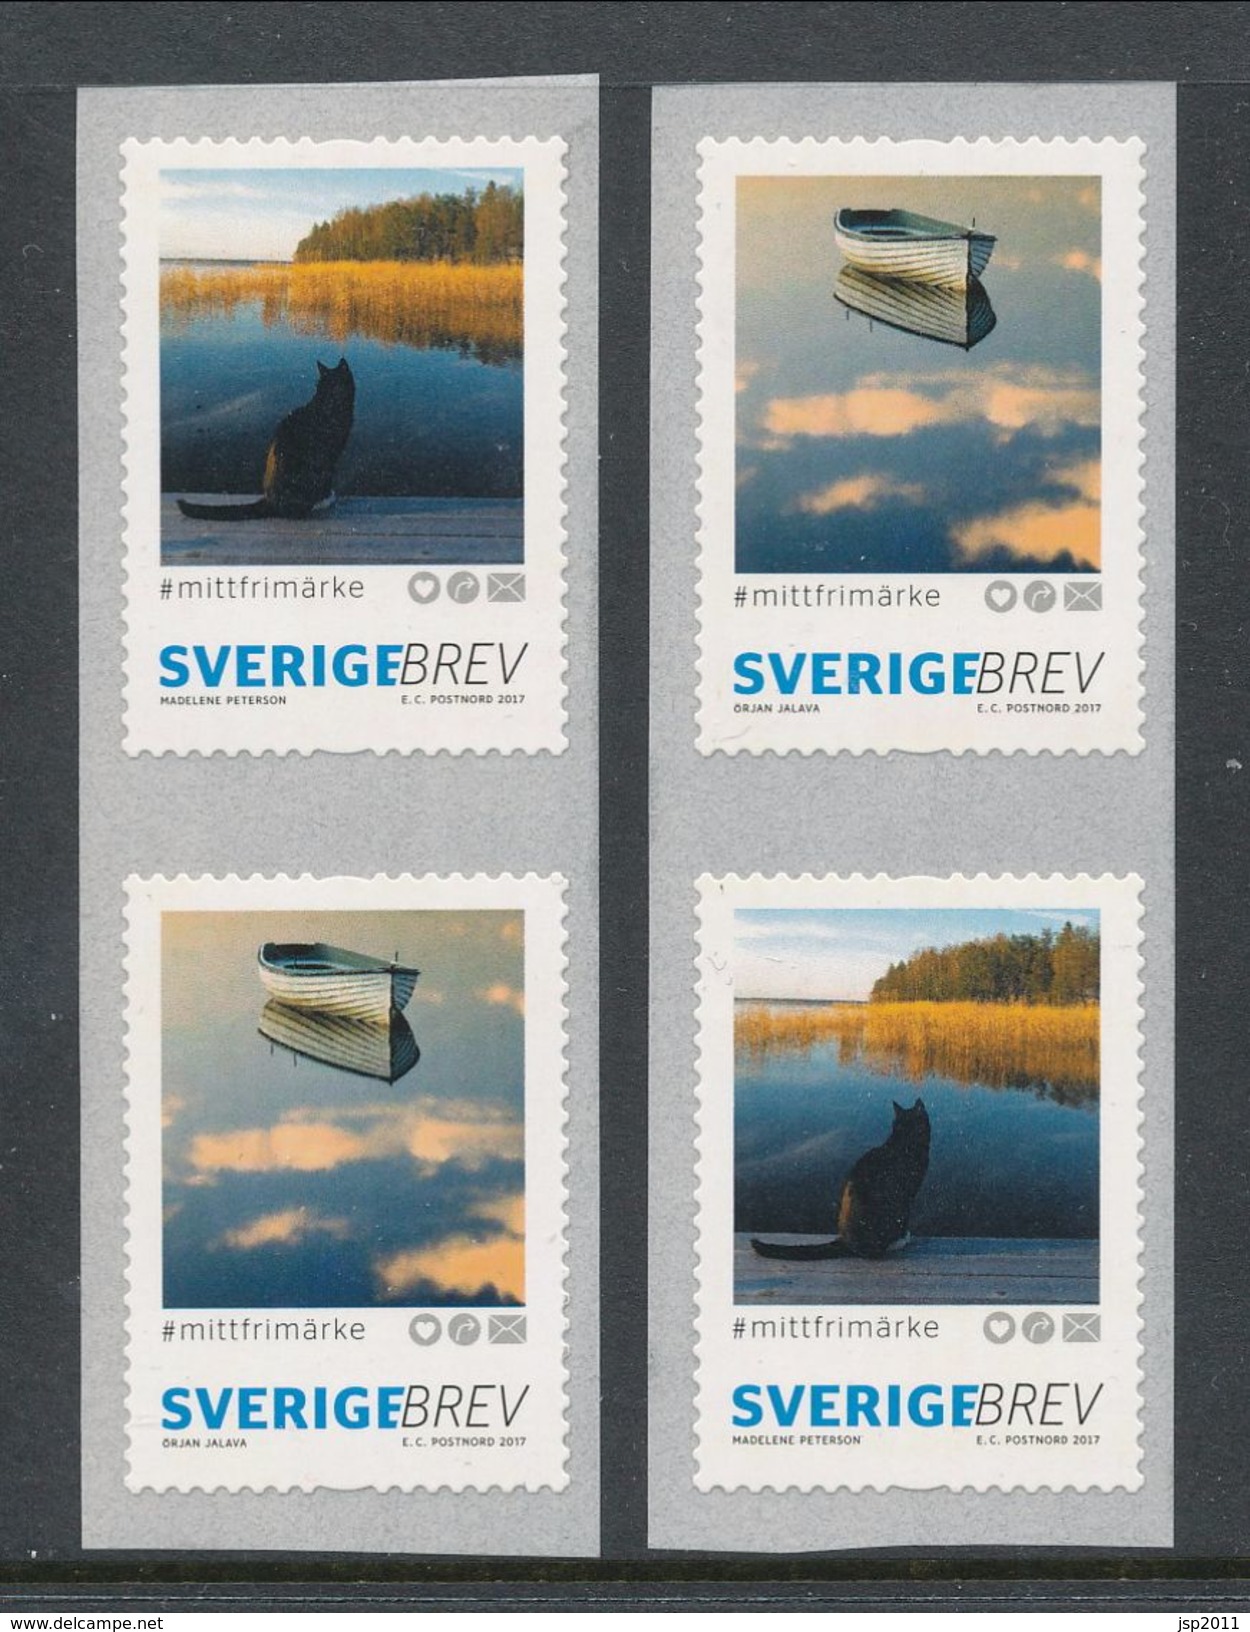 Sweden 2017. Facit # 3176-3177. My Stamp - National Mail Coil. Coil Pairs SX1 And SX2. MNH (**) - Unused Stamps